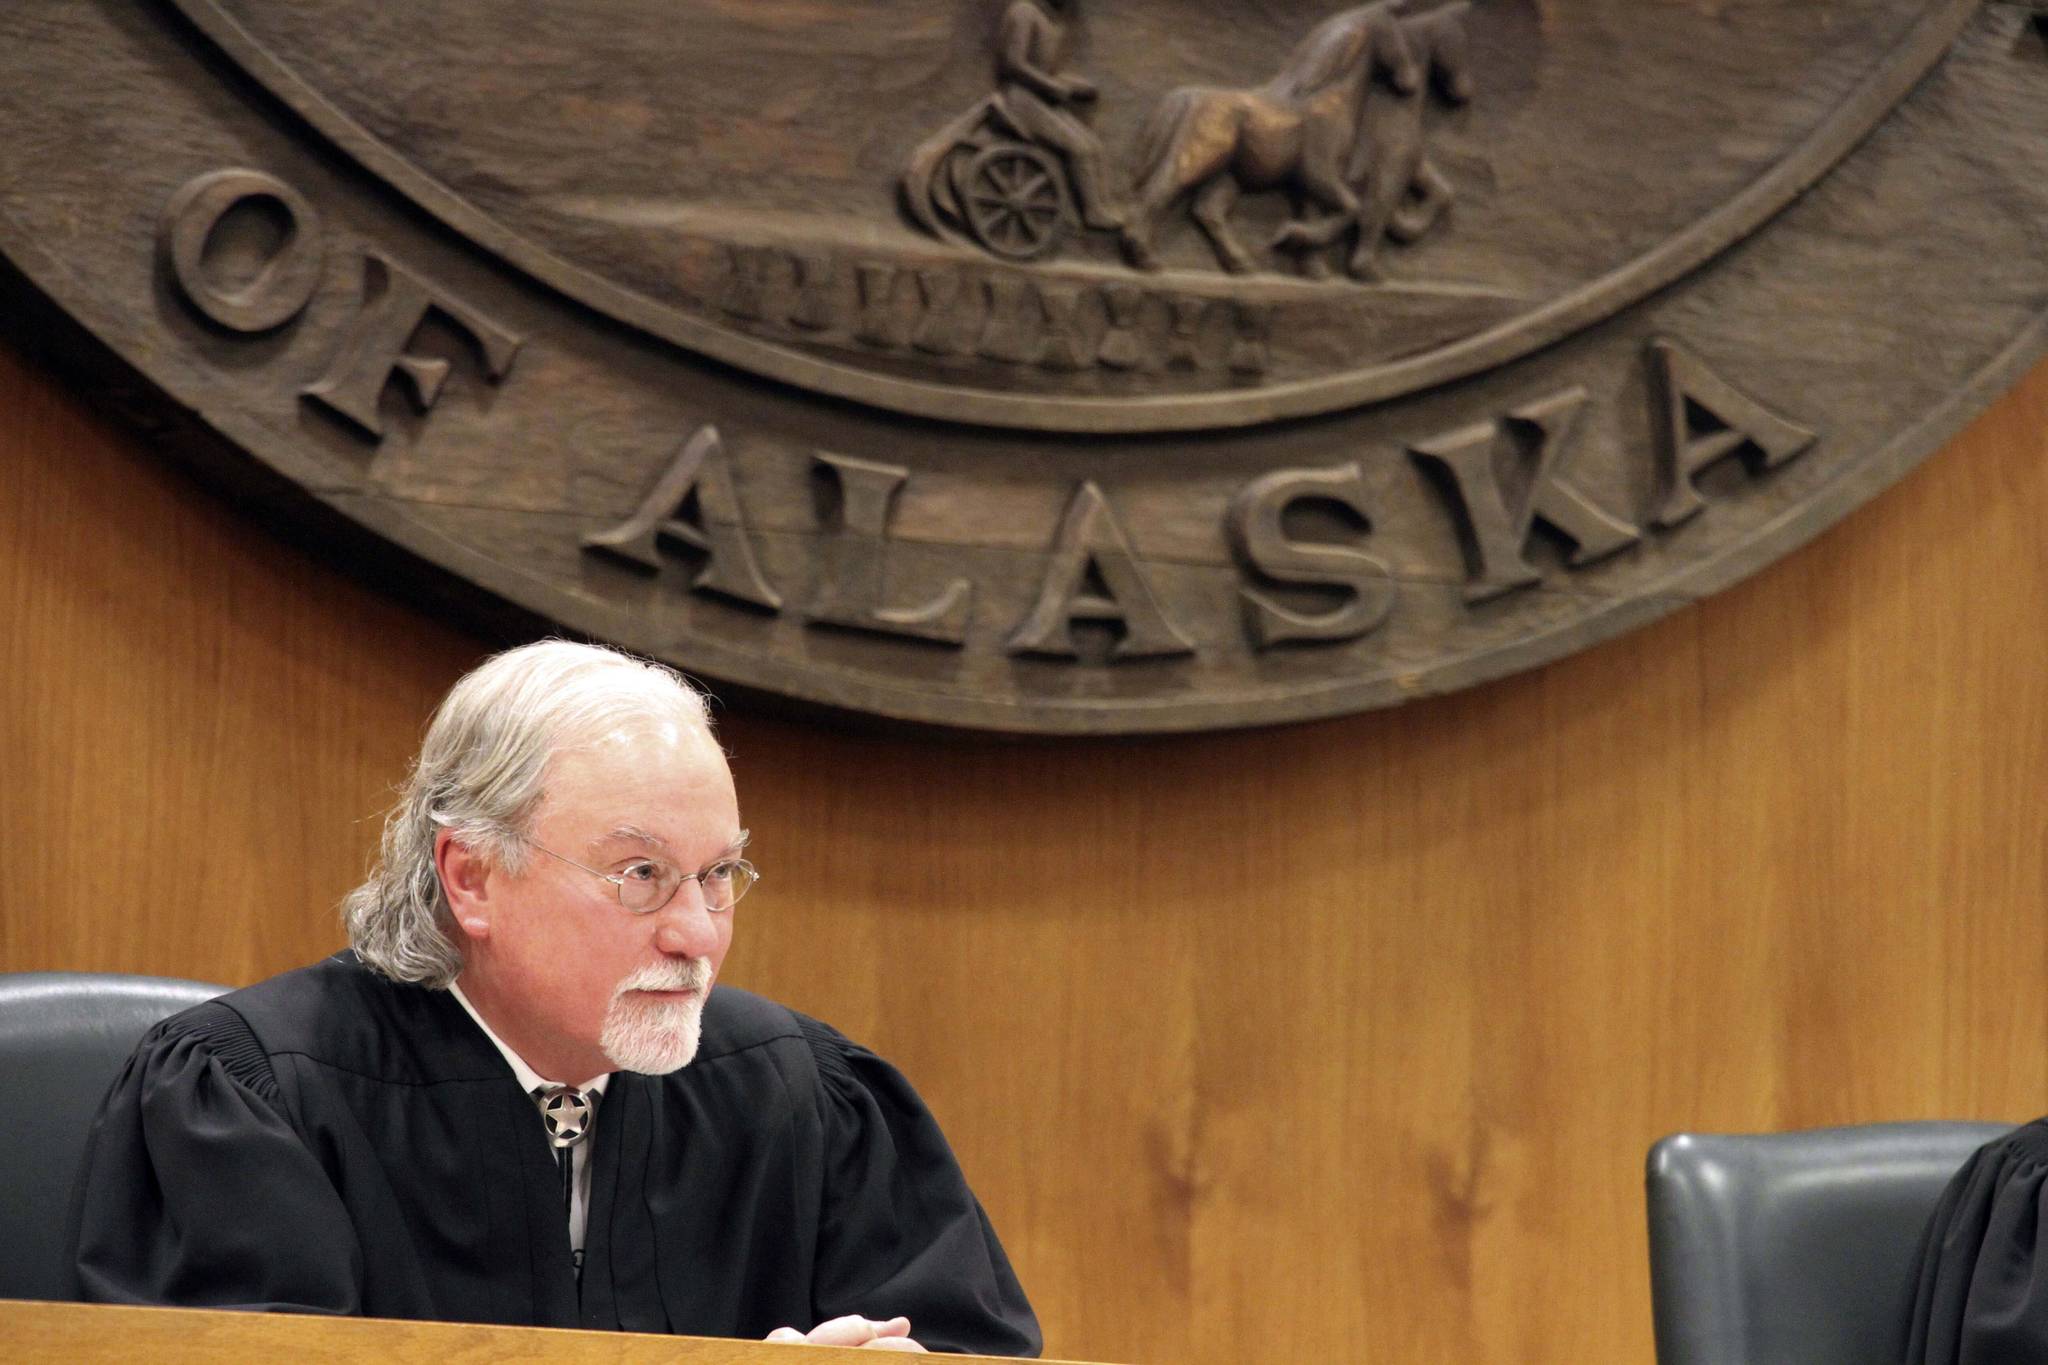 Alaska Supreme Court Justice Craig Stowers listens to arguments in a lawsuit that claims state policy on fossil fuels is harming the constitutional right of young Alaskans to a safe climate Wednesday, Oct. 9, 2019, in Anchorage, Alaska. Sixteen Alaska youths in 2017 sued the state, claiming that human-caused greenhouse gas emission leading to climate change is creating long-term, dangerous health effects. They lost in Superior Court, but appealed to Alaska’s highest court. (AP Photo/Mark Thiessen)